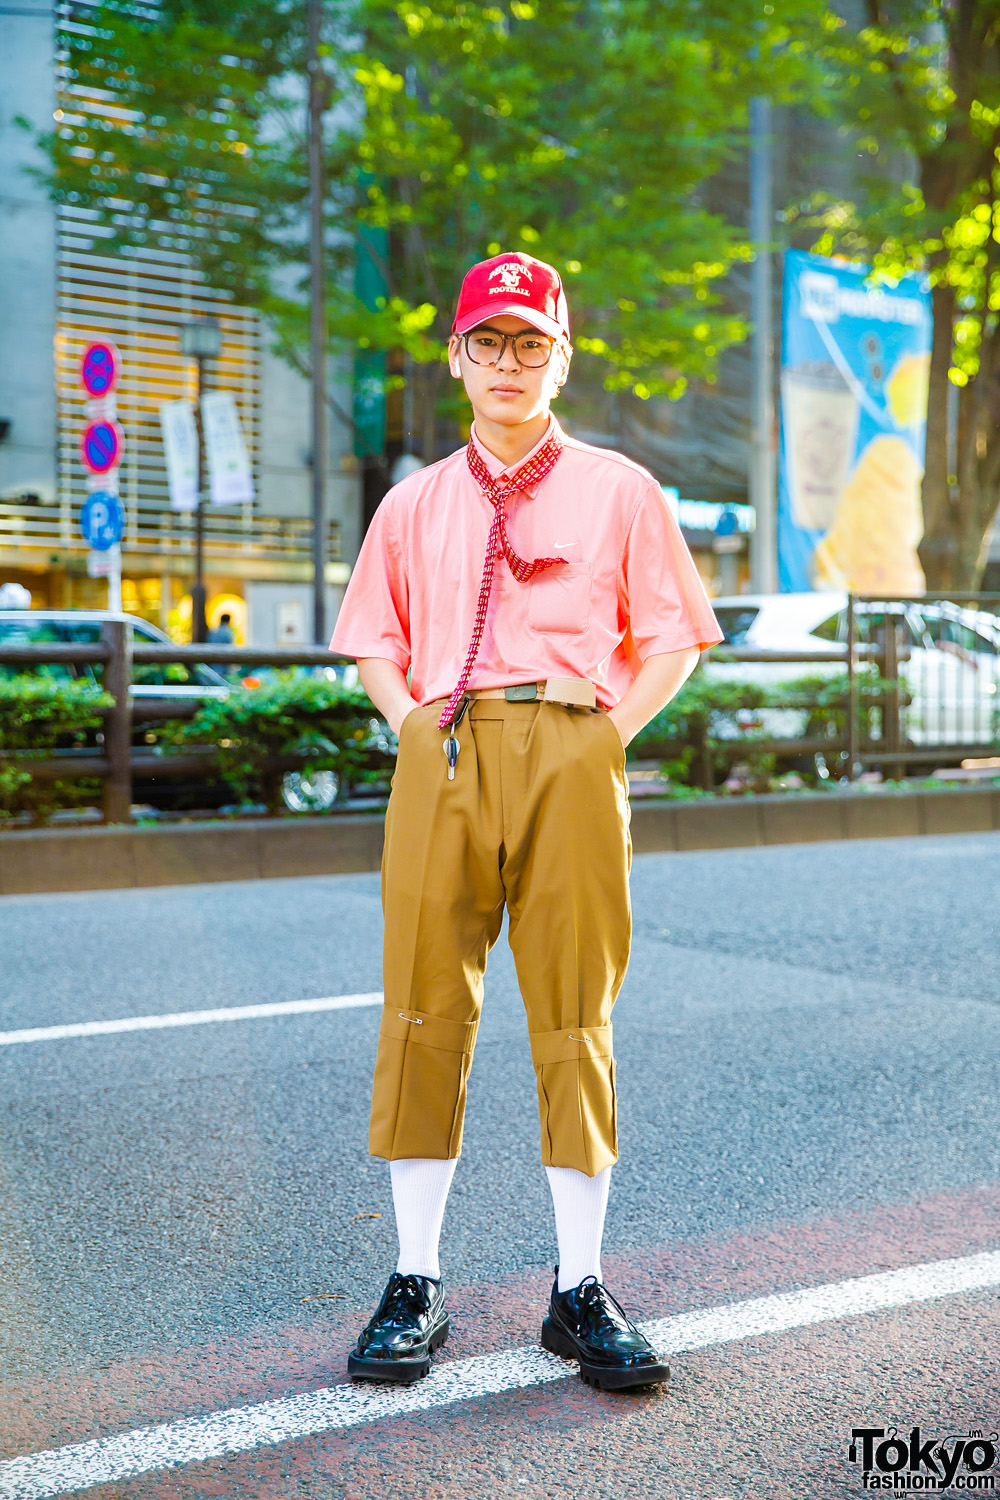 Harajuku Streetwear Style w/ Safety Pin Tie, Pink Striped Top, Soe Cuffed Pants & Rombaut Shoes